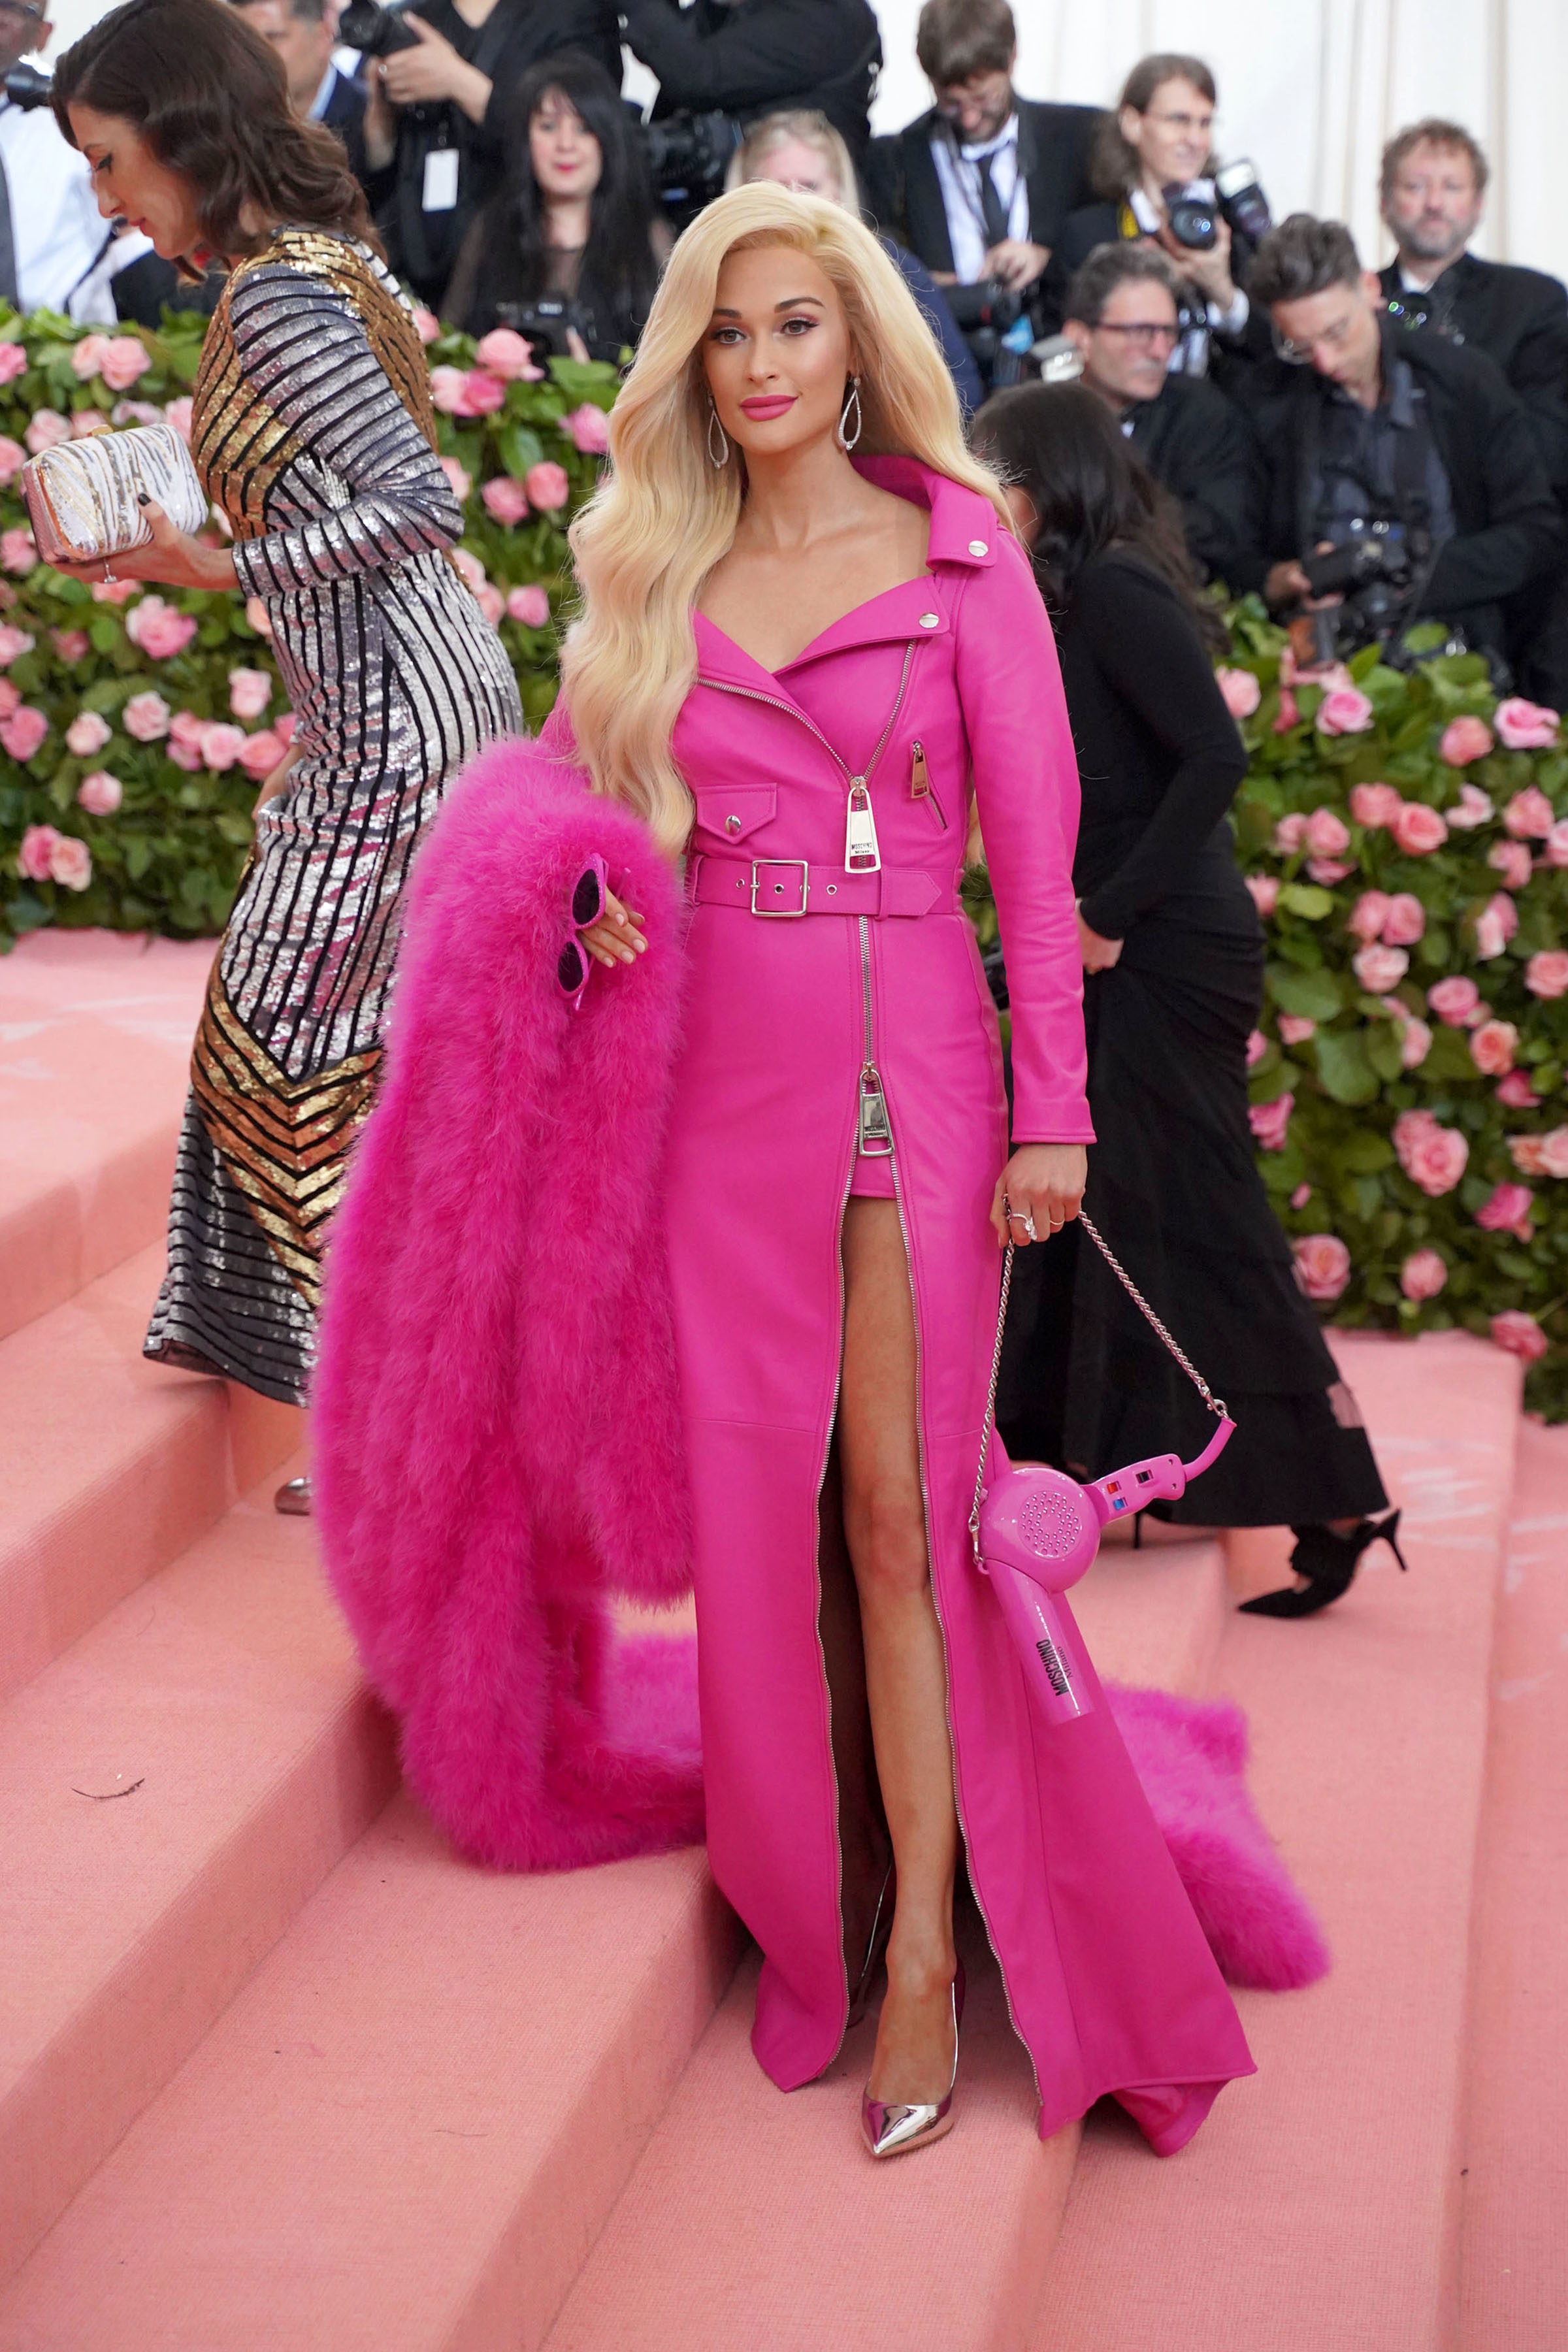 Person in a pink outfit with a high-slit skirt and matching long coat at a gala event